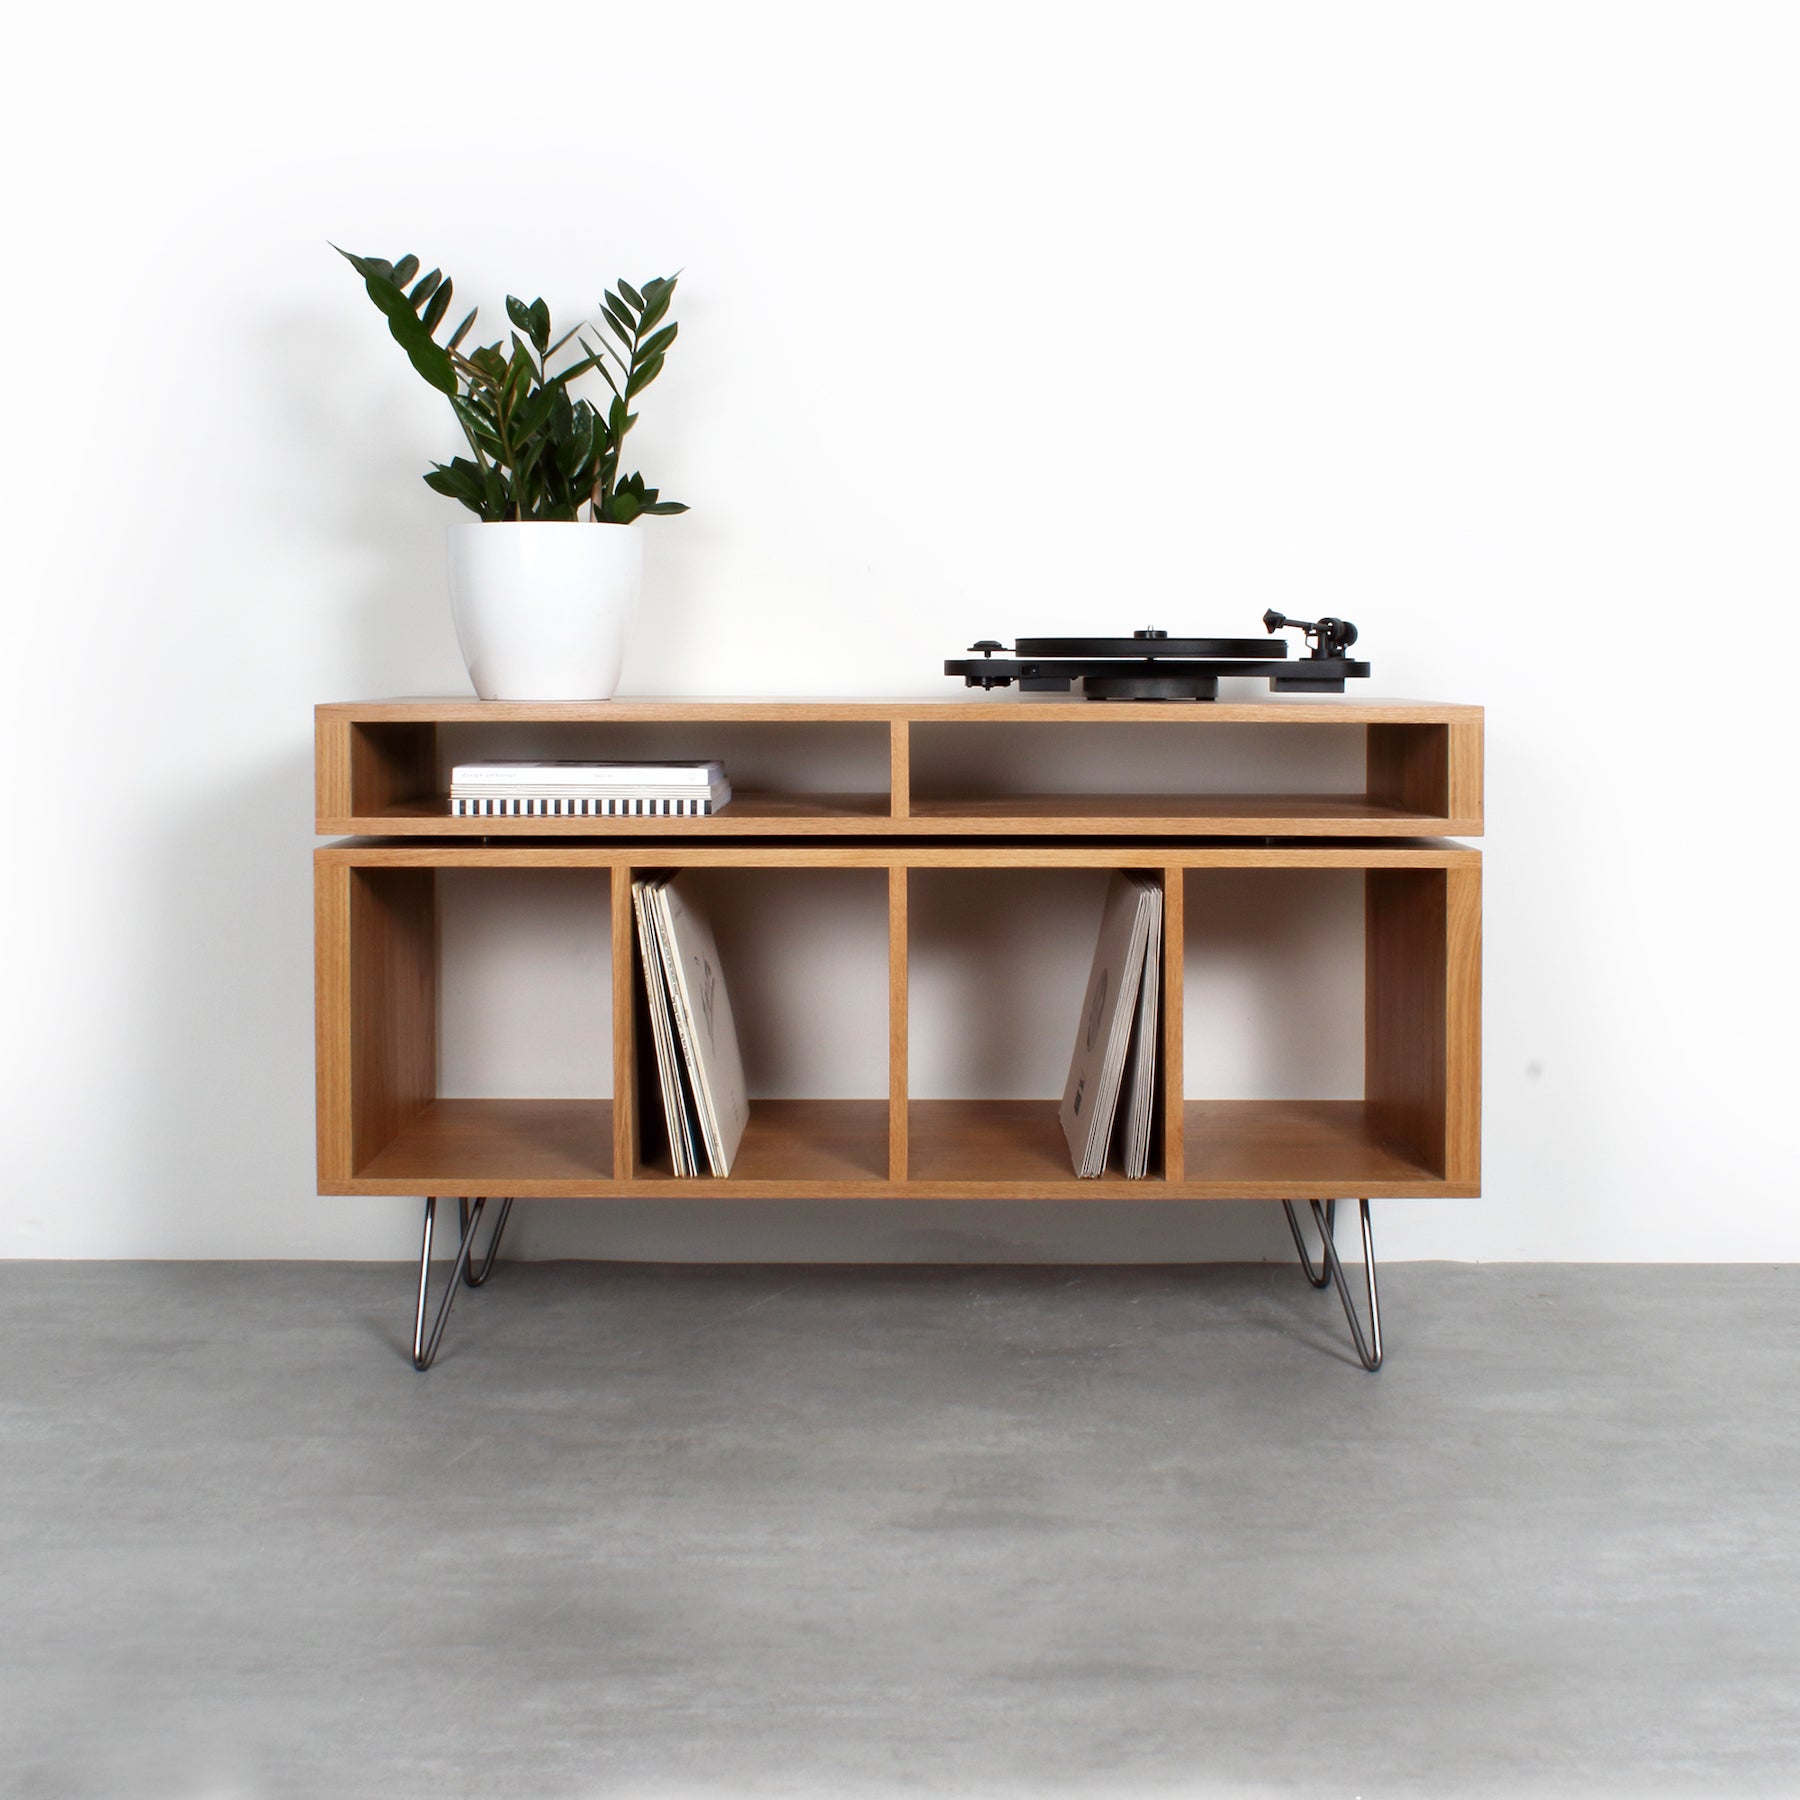 Kelston Record Player Cabinet on Hairpin legs